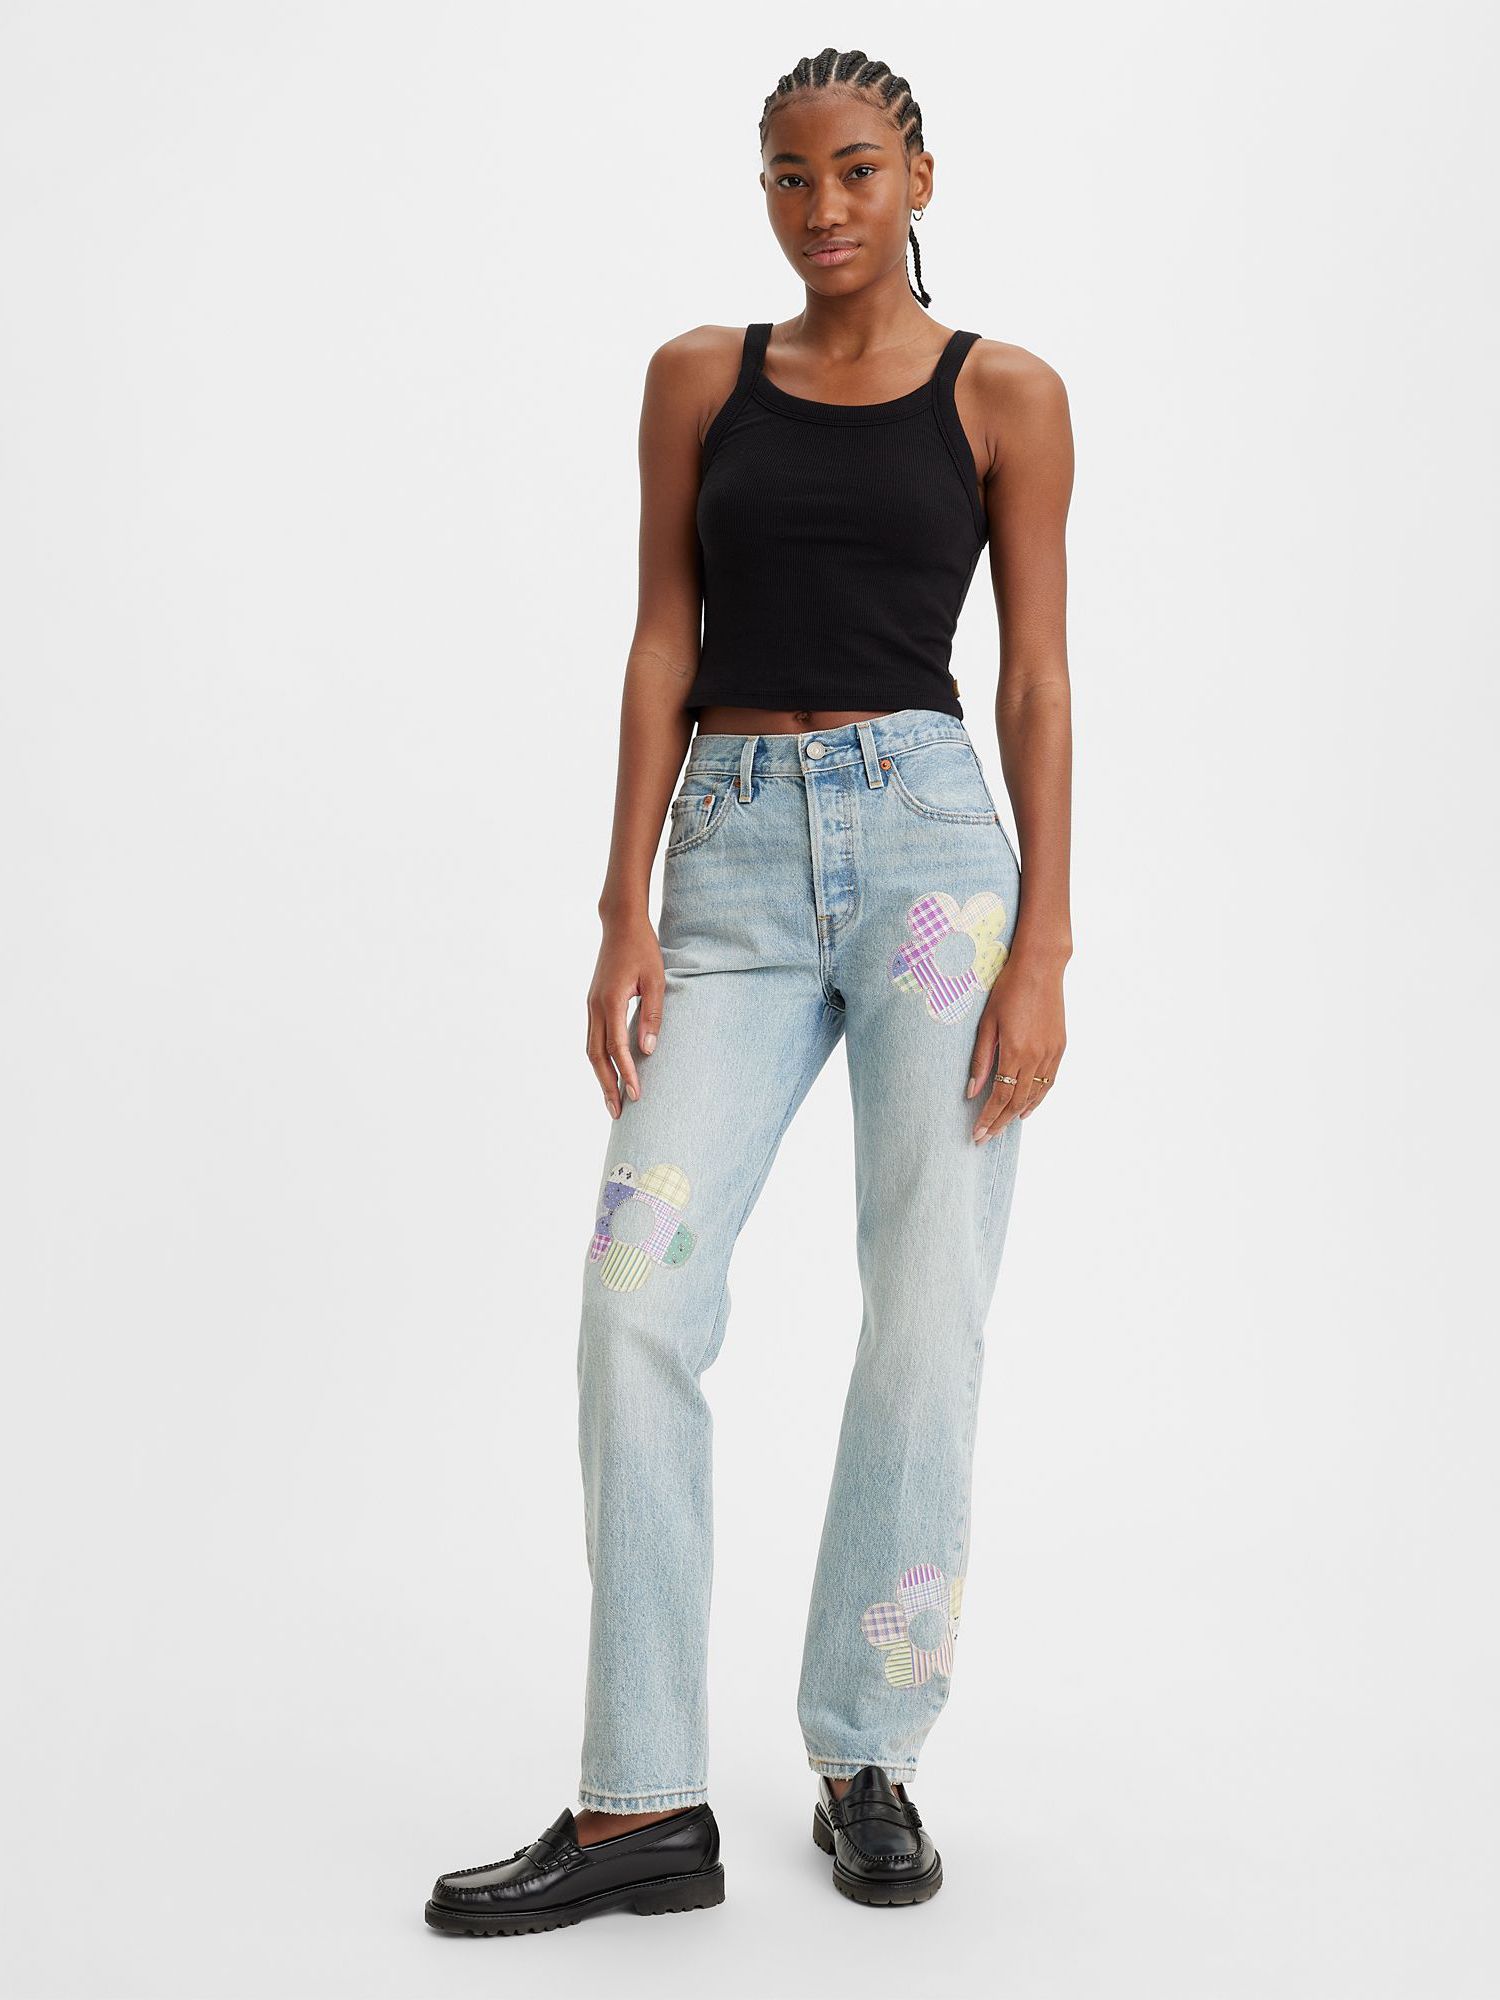 Levi's 501 Patchwork Fresh As A Daisy Jeans, Blue at John Lewis & Partners